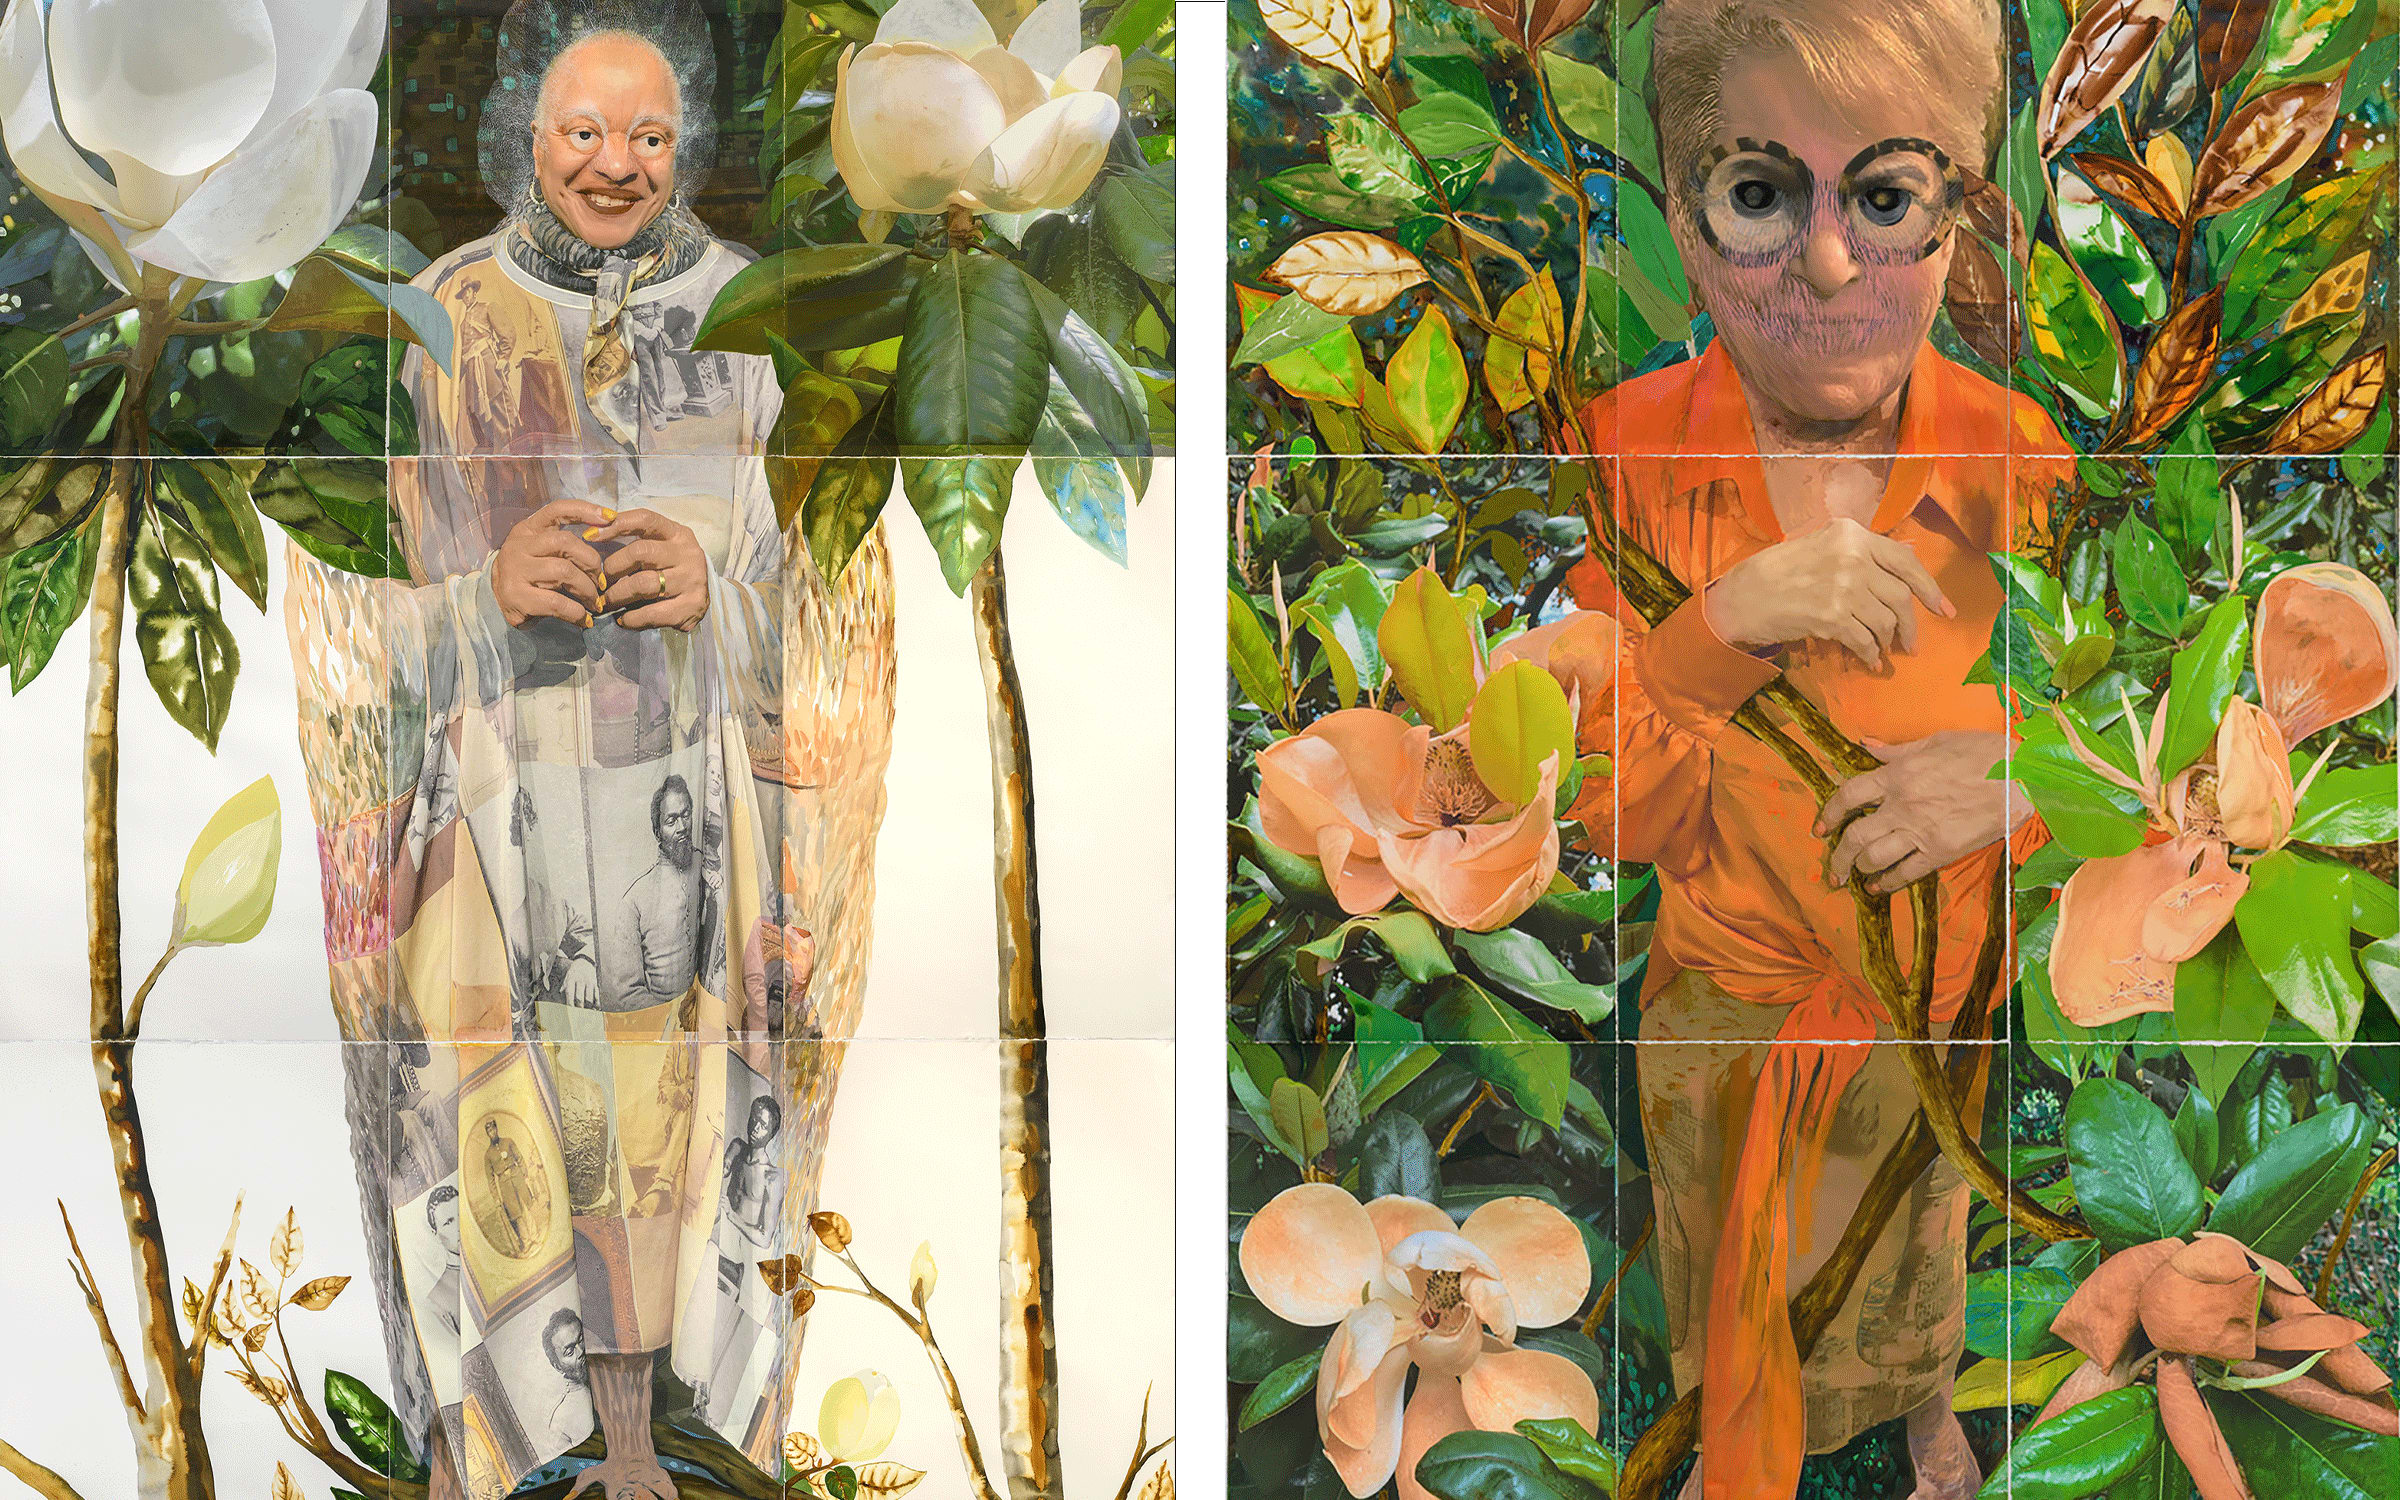 Both artworks by María Magdalena Campos-Pons, courtesy of the artist, Galerie Barbara Thumm, and Gallery Wendi Norris. Left: Secrets of the Magnolia Trees. Deb Luminosity, 2022 (from the series: ‘Forest of Solitude’). Right: Bernice Look-Out, 2022 (from the series: ‘Forest of Solitude’).